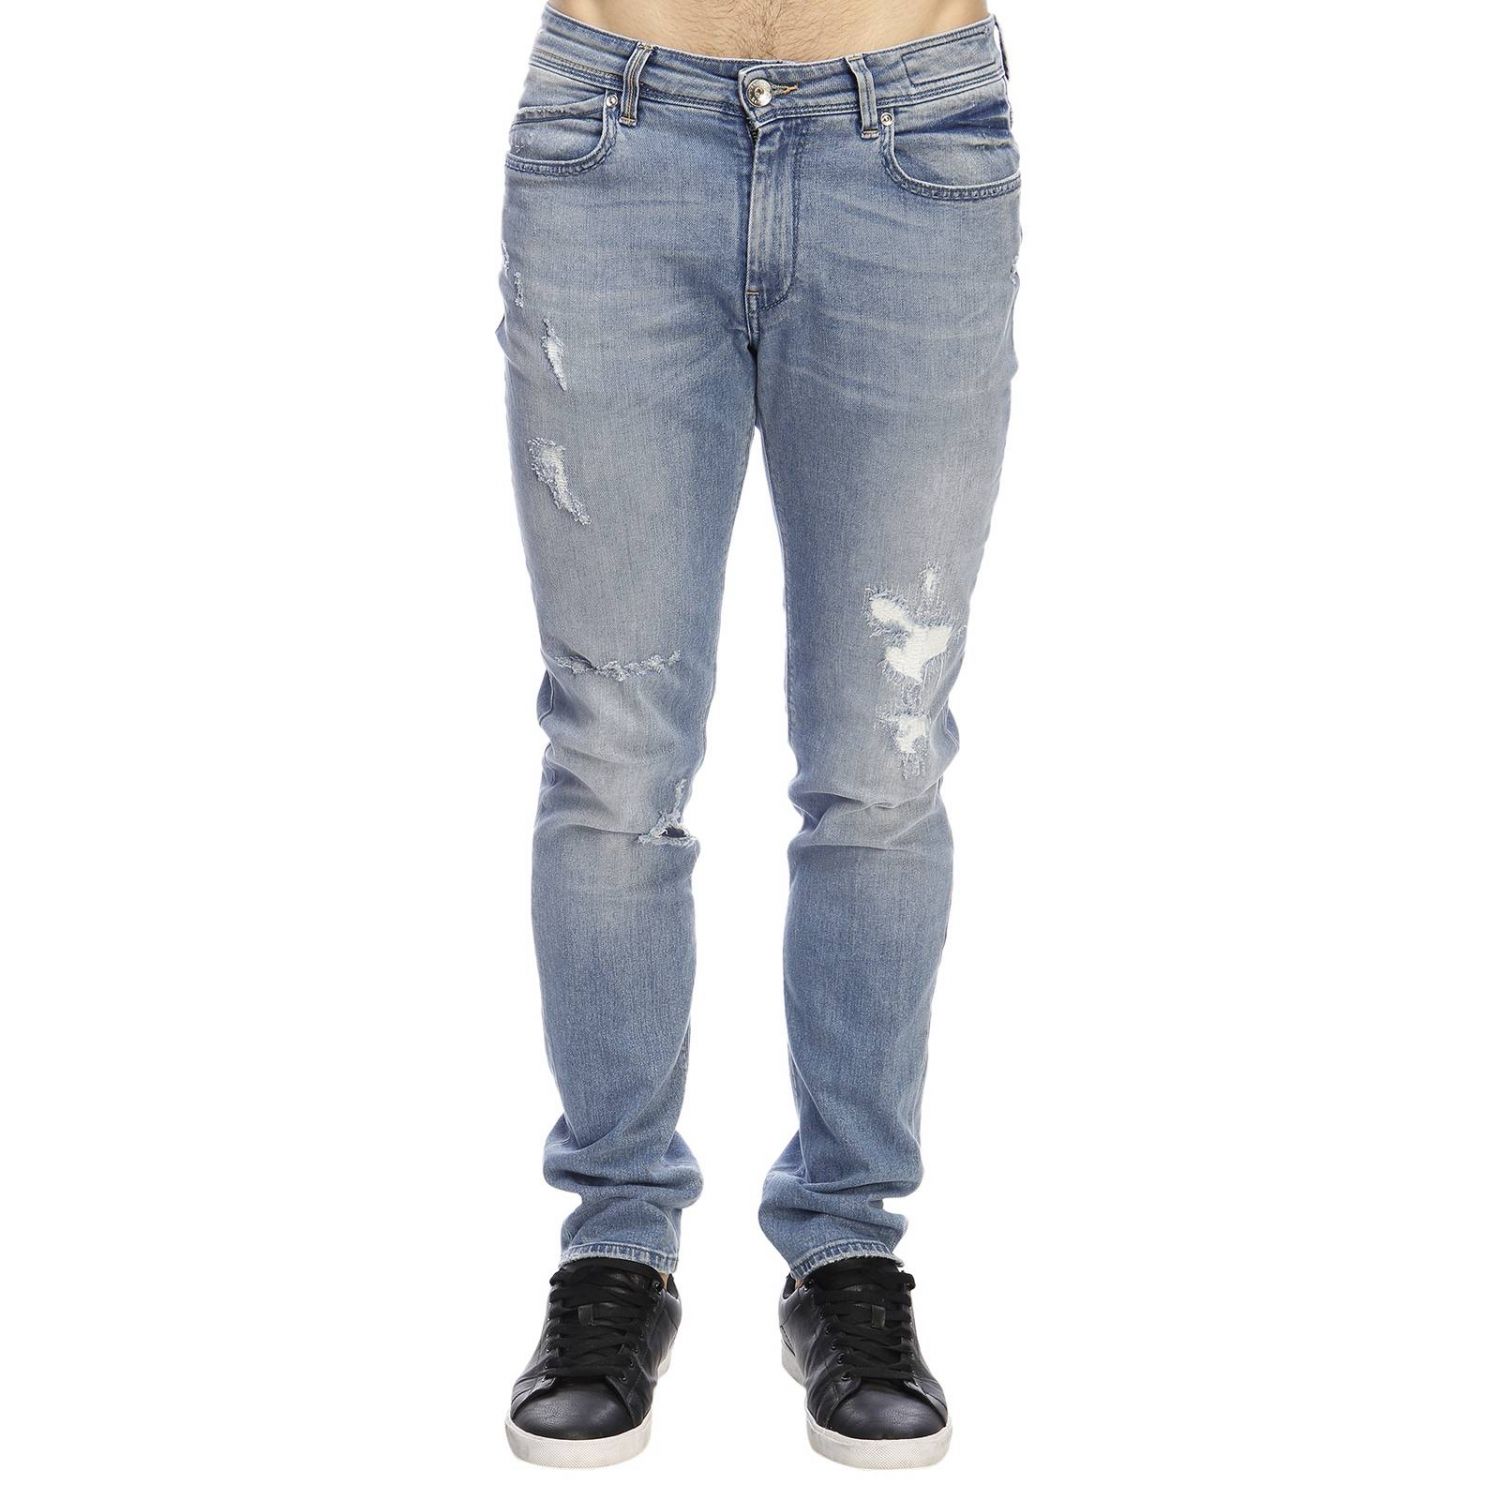 Re-Hash Outlet: Jeans men - Blue | Jeans Re-Hash P015 2781 GIGLIO.COM